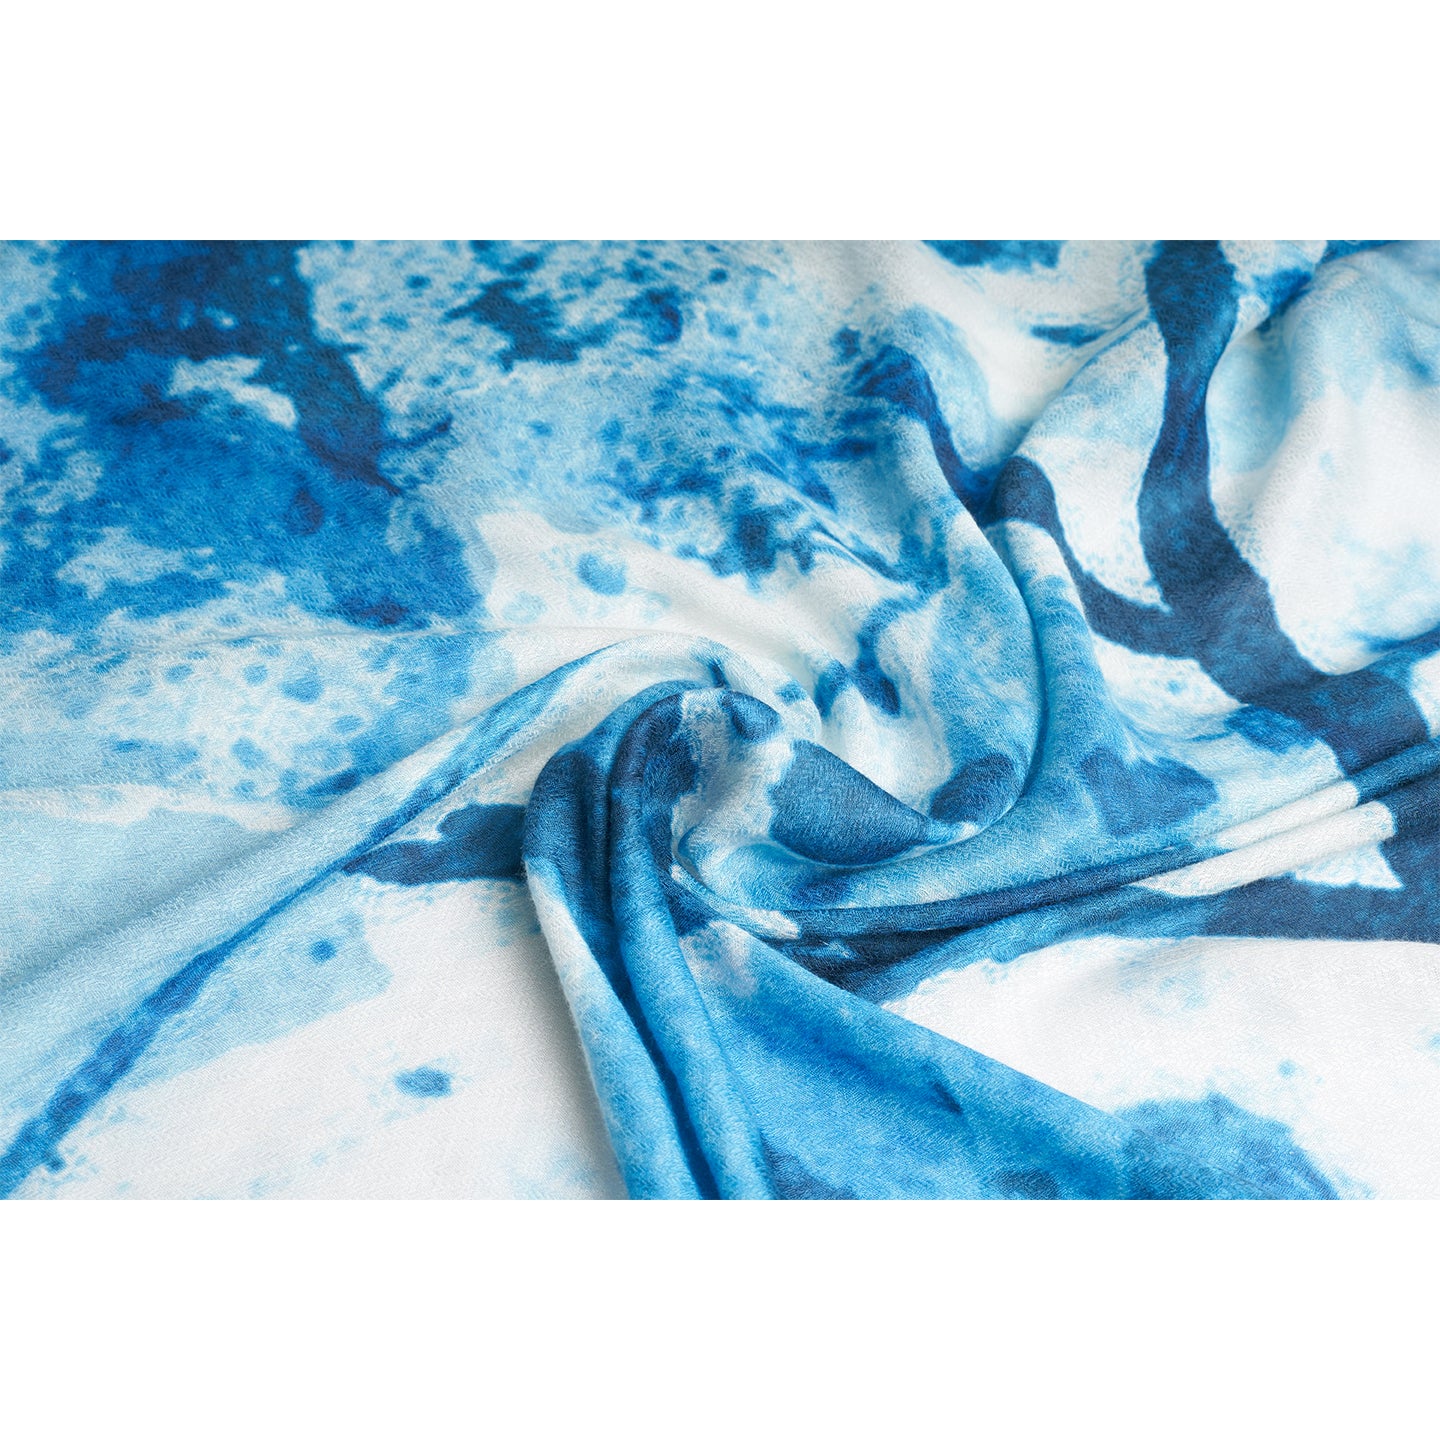 Square scarf crafted in Blue and White color with wild misty print of leaves and rain drops, with two solid color borders.